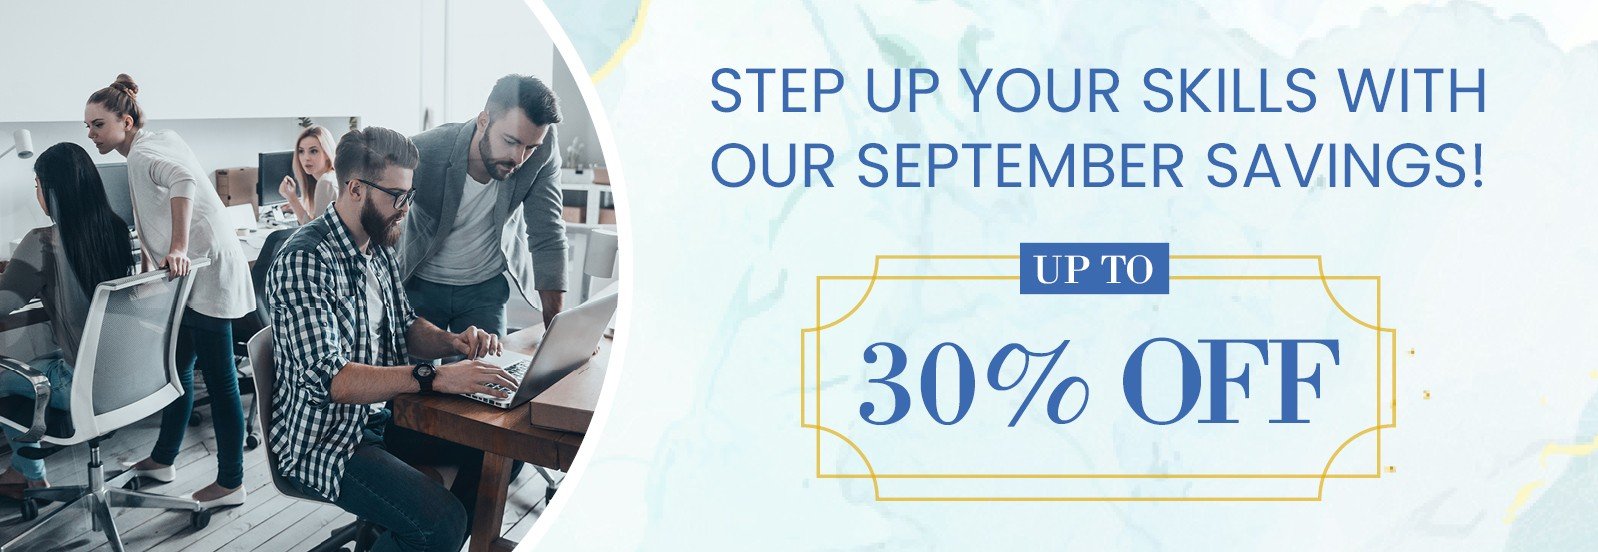 <p>UP TO 30% OFF E-LEARNING!</p>